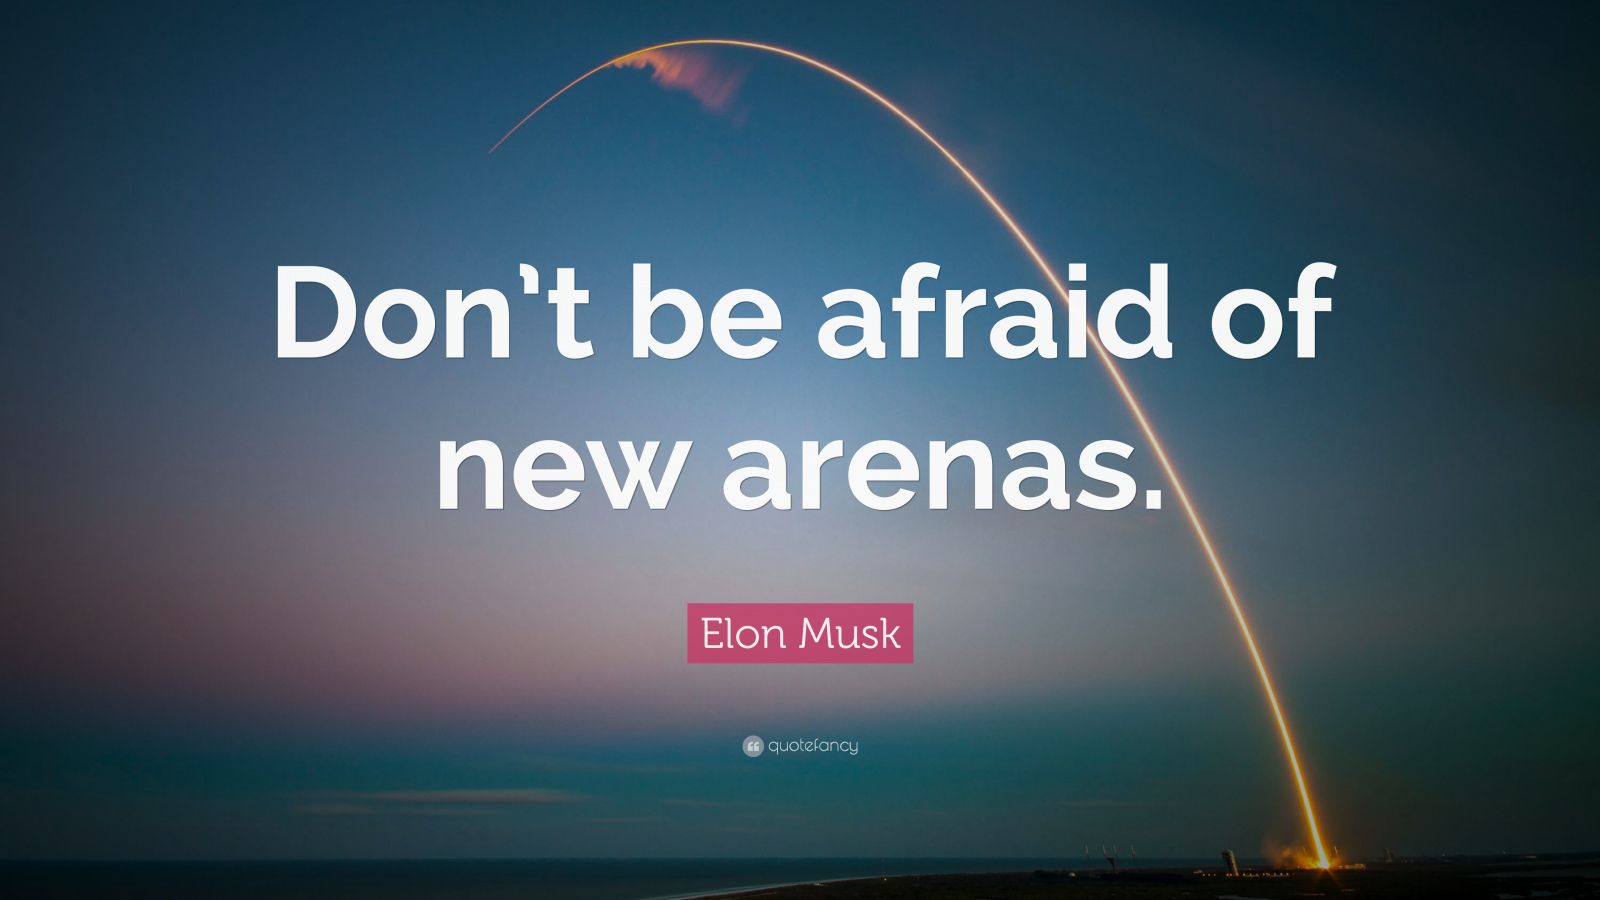 Elon Musk Quote “Don t be afraid of new arenas ”